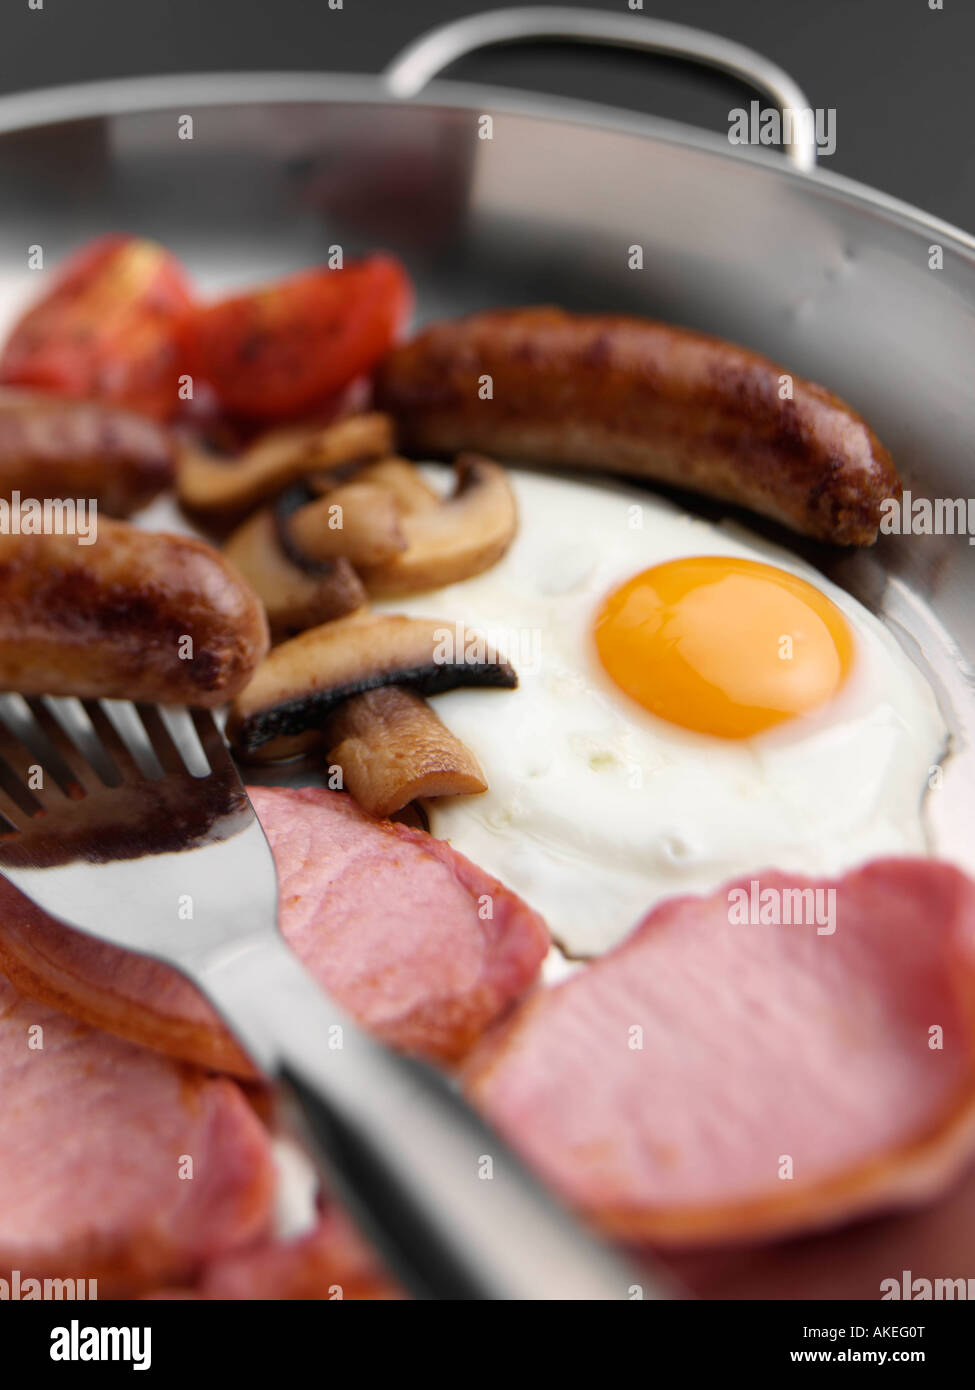 A full English cooked breakfast in a frying pan editorial food Stock Photo